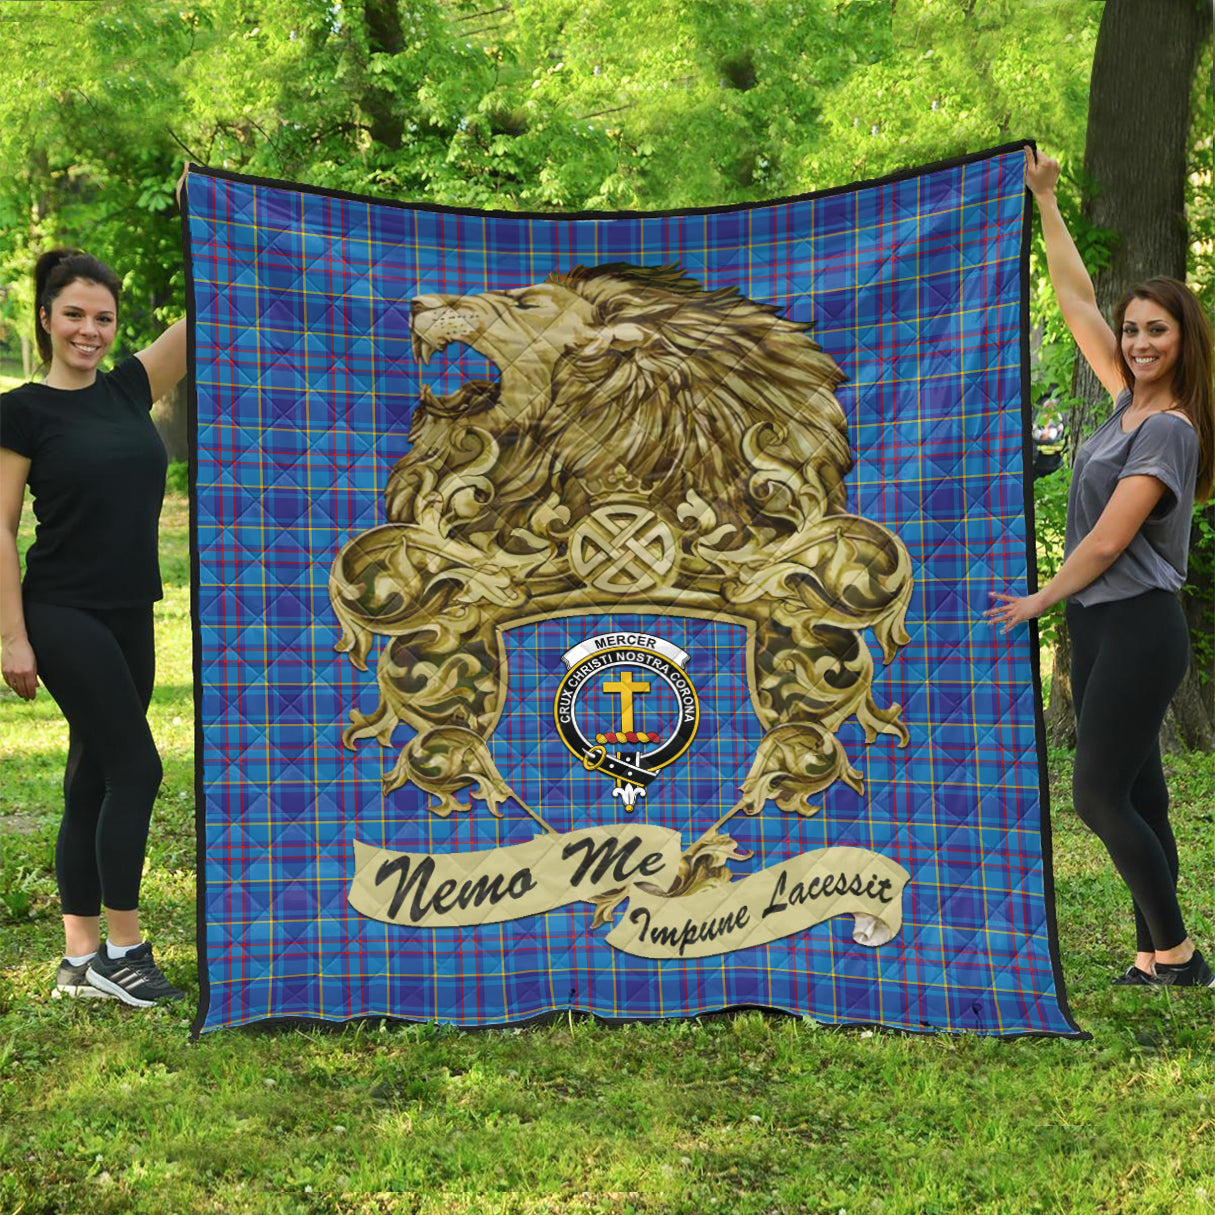 mercer-modern-tartan-quilt-with-motto-nemo-me-impune-lacessit-with-vintage-lion-family-crest-tartan-quilt-pattern-scottish-tartan-plaid-quilt-vintage-style